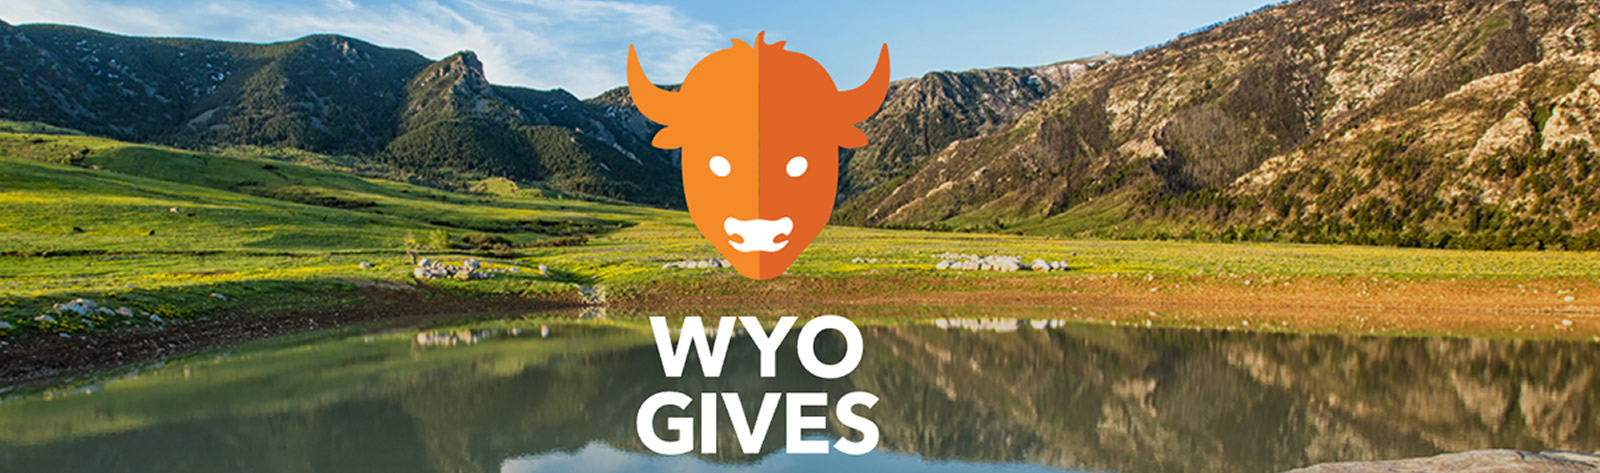 WCPG JOINS WYOGIVES!